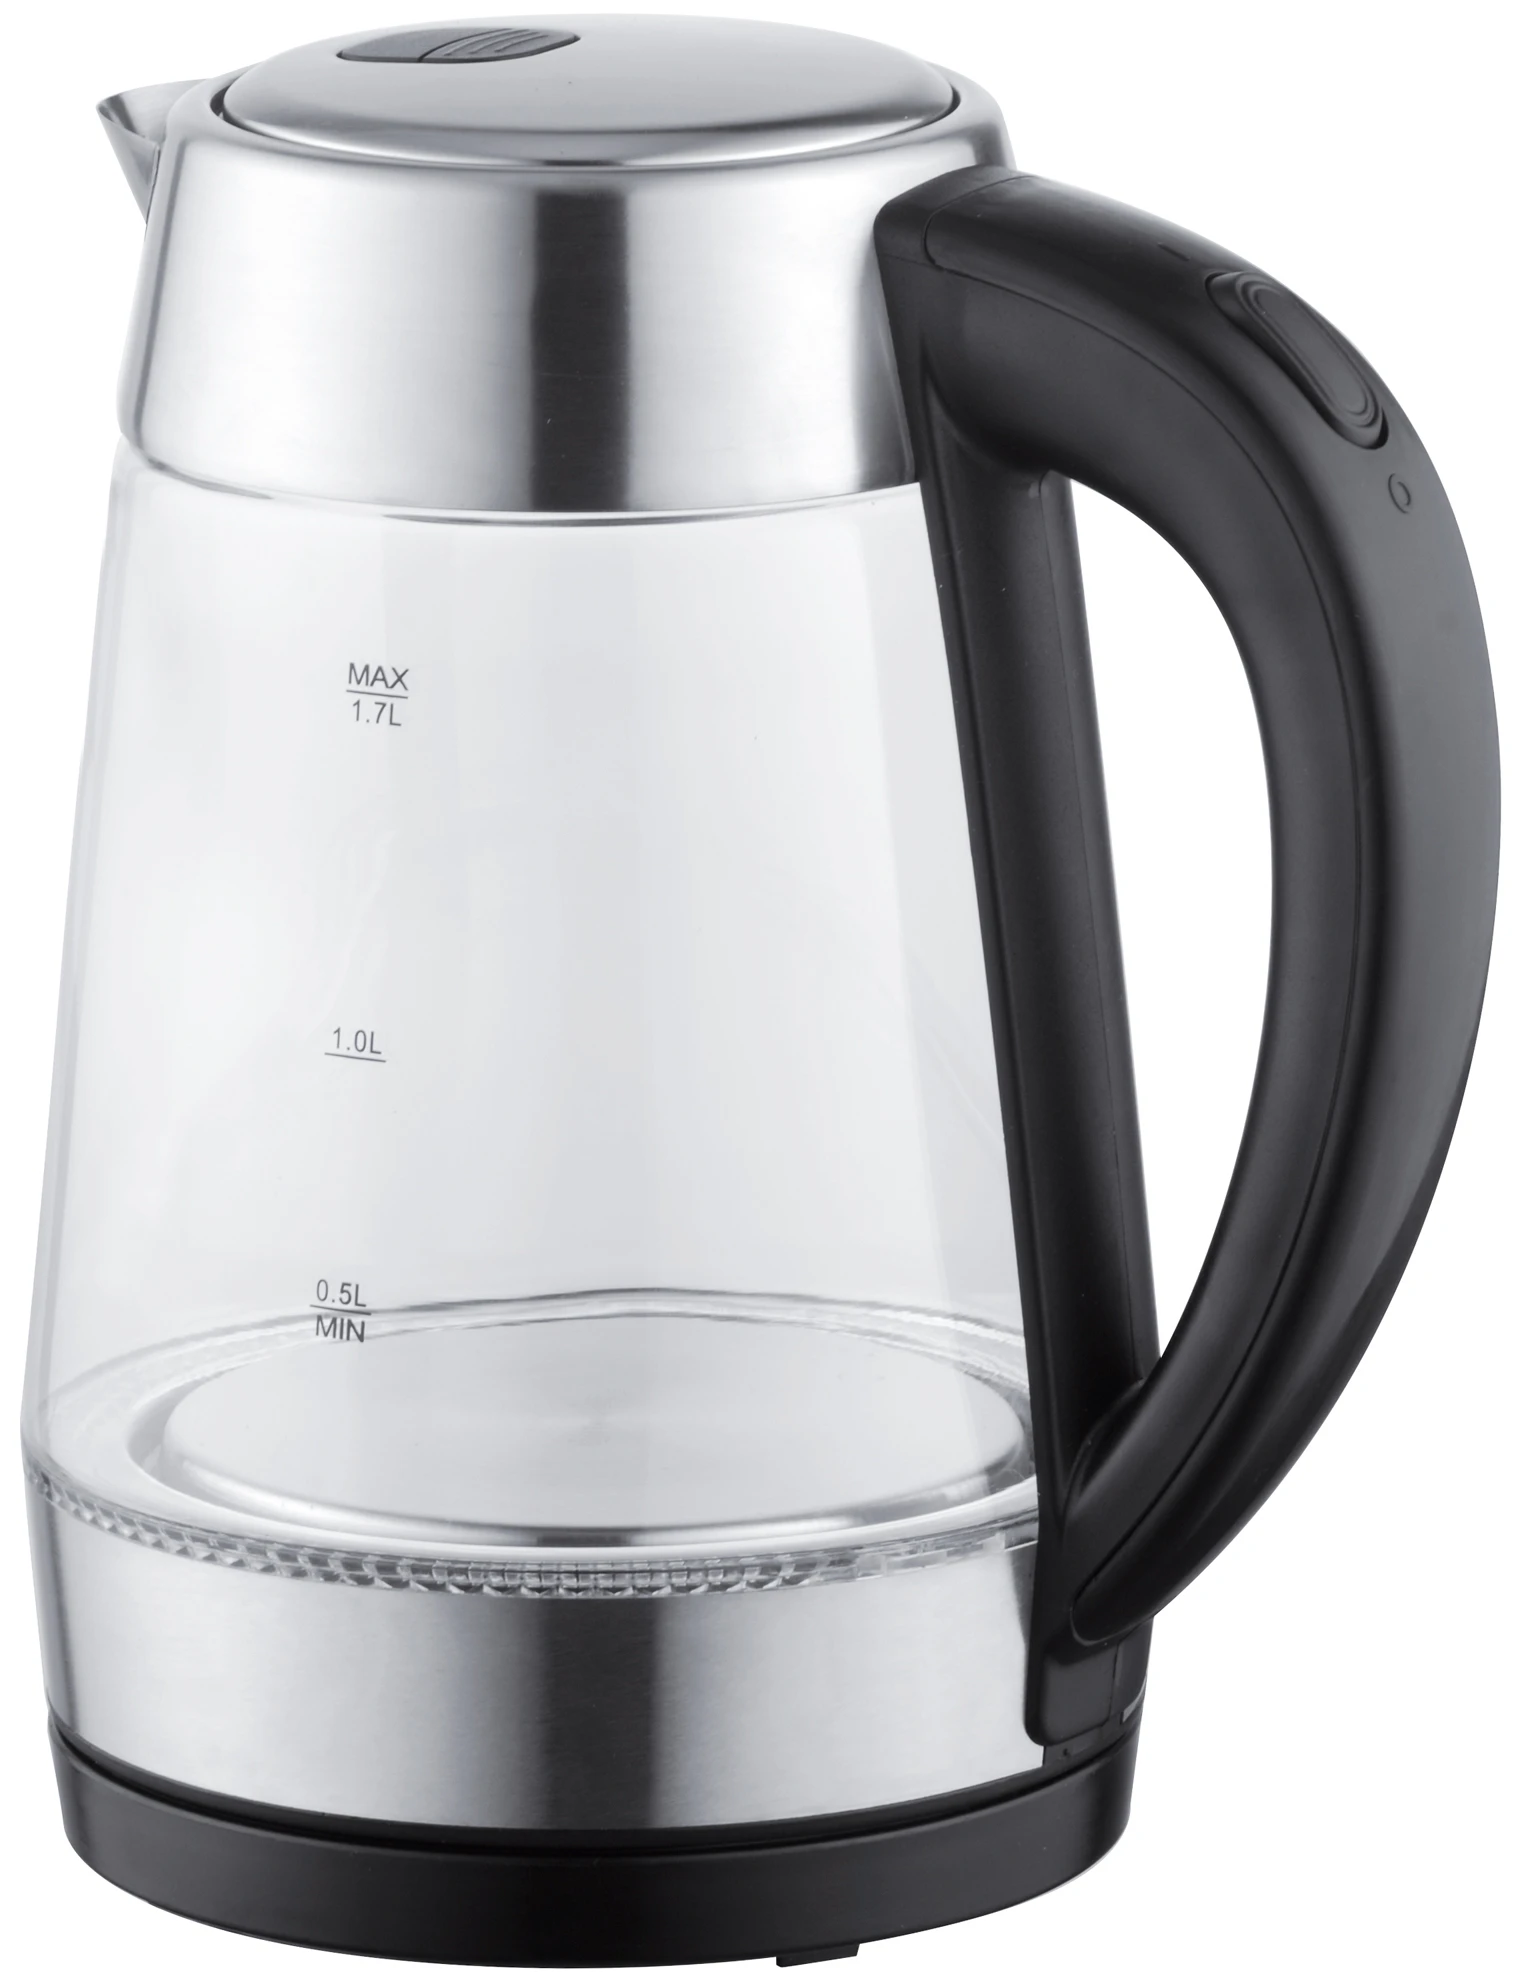 1.7L Capacity 2200W high power fast boilingfull stainless steel  healty Glass Electric Water Kettle